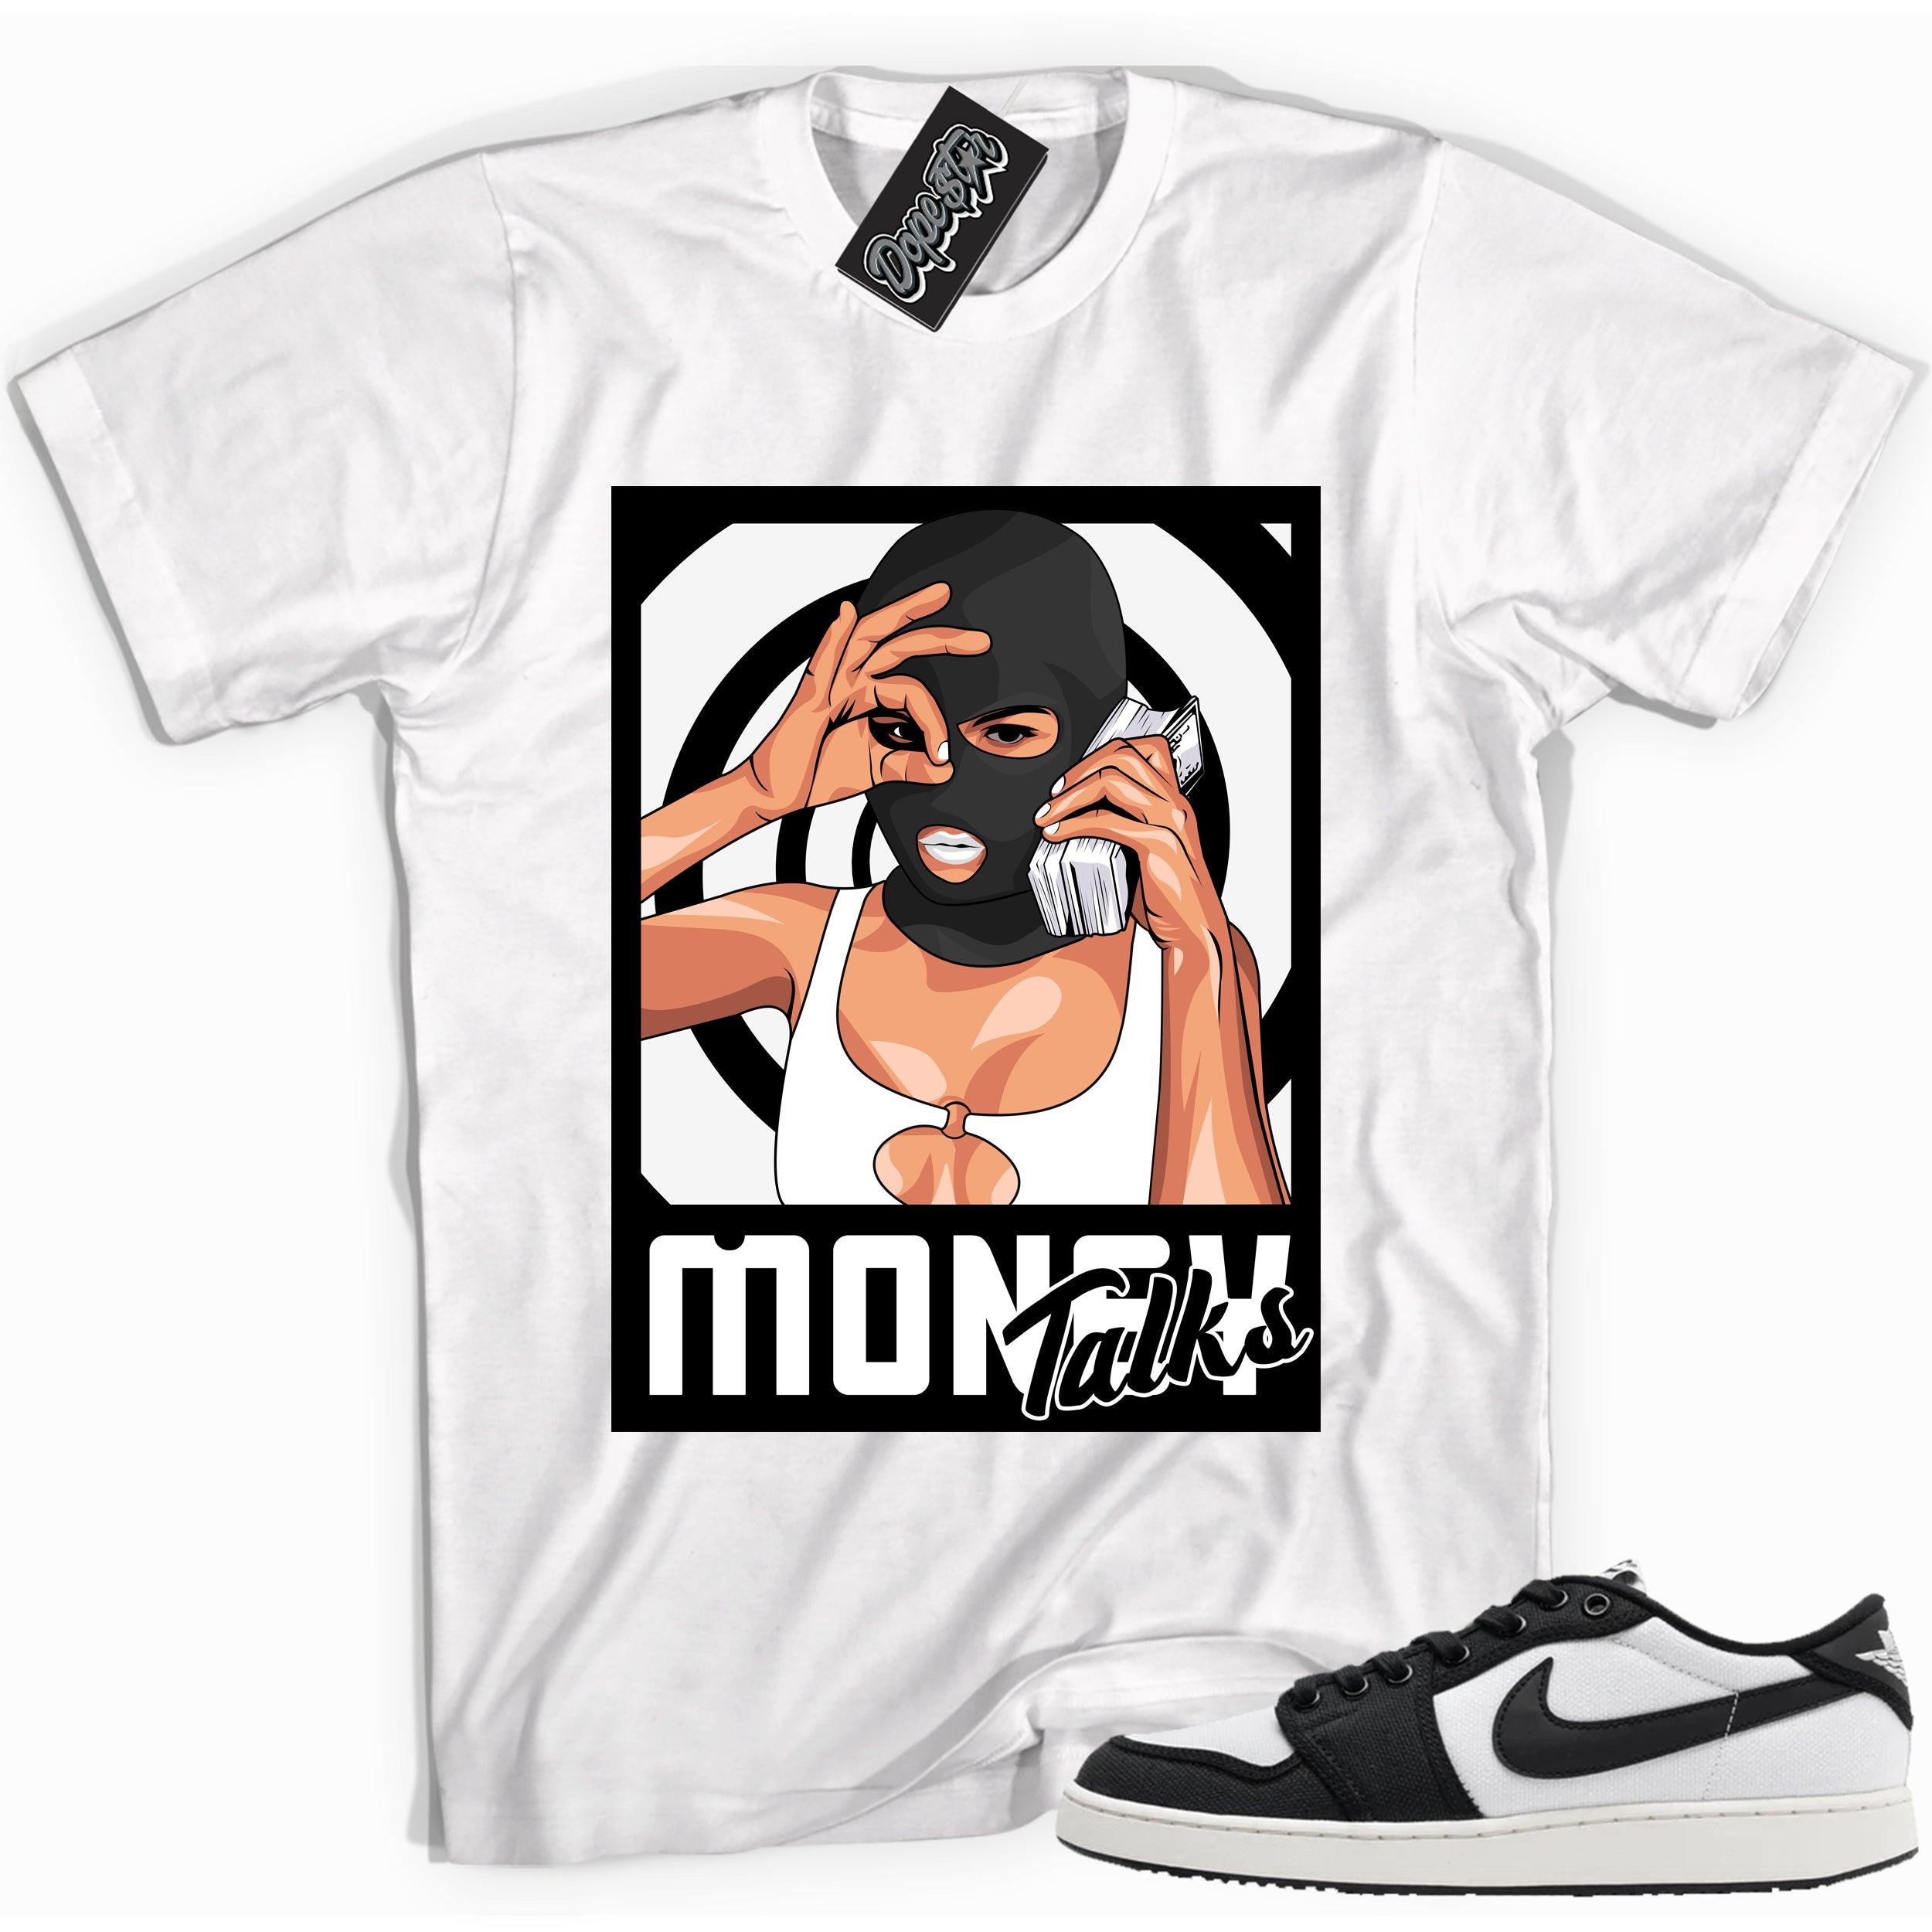 Cool white graphic tee with 'money talks' print, that perfectly matches Air Jordan 1 Retro Ajko Low Black & White sneakers.